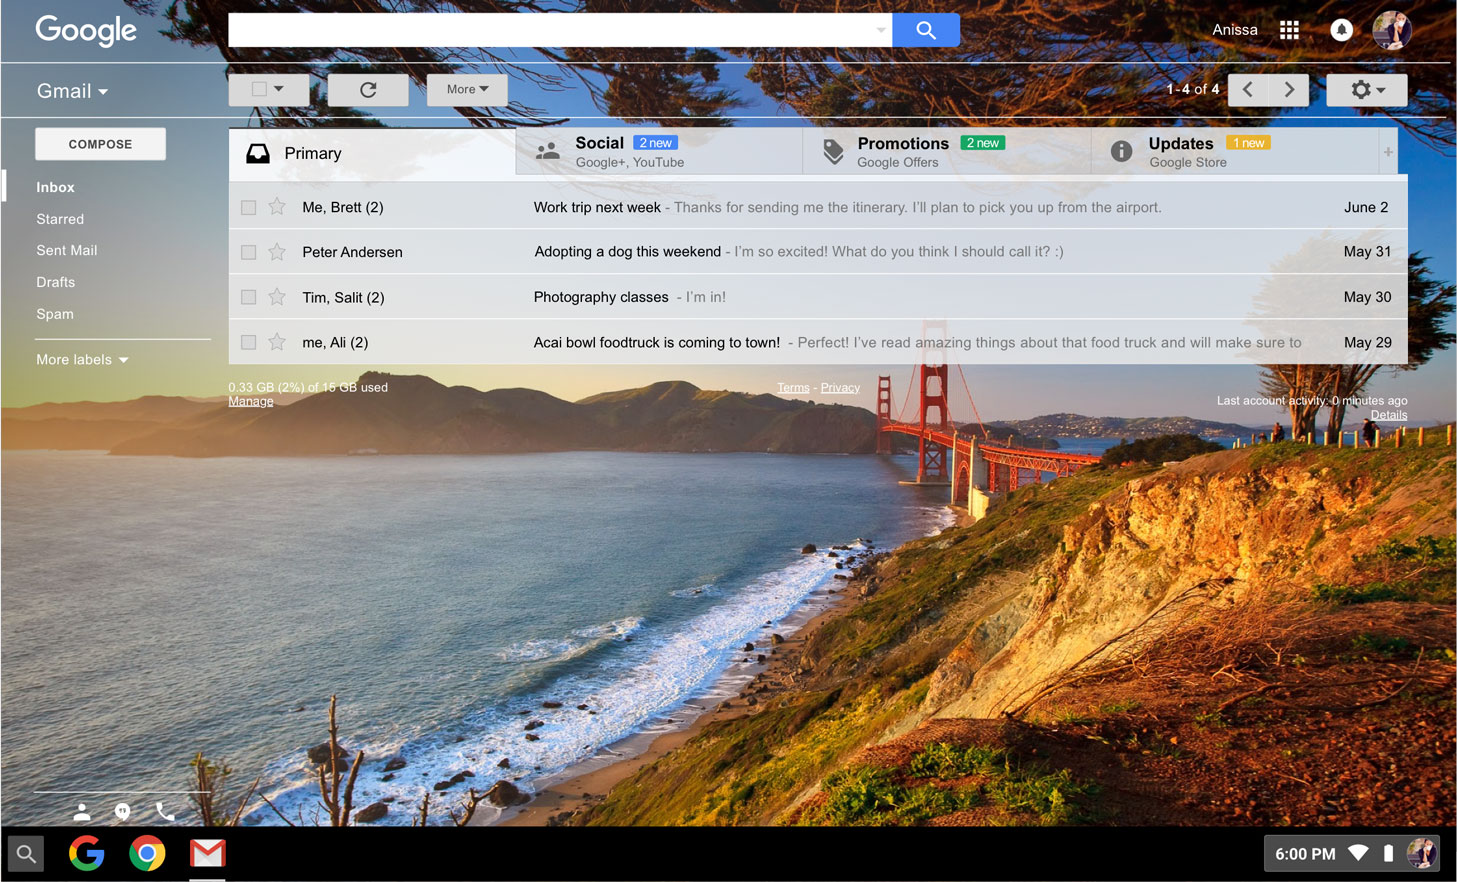 Gmail Software - Choose from Gmail's inbox themes, or select your own image to use as a custom theme